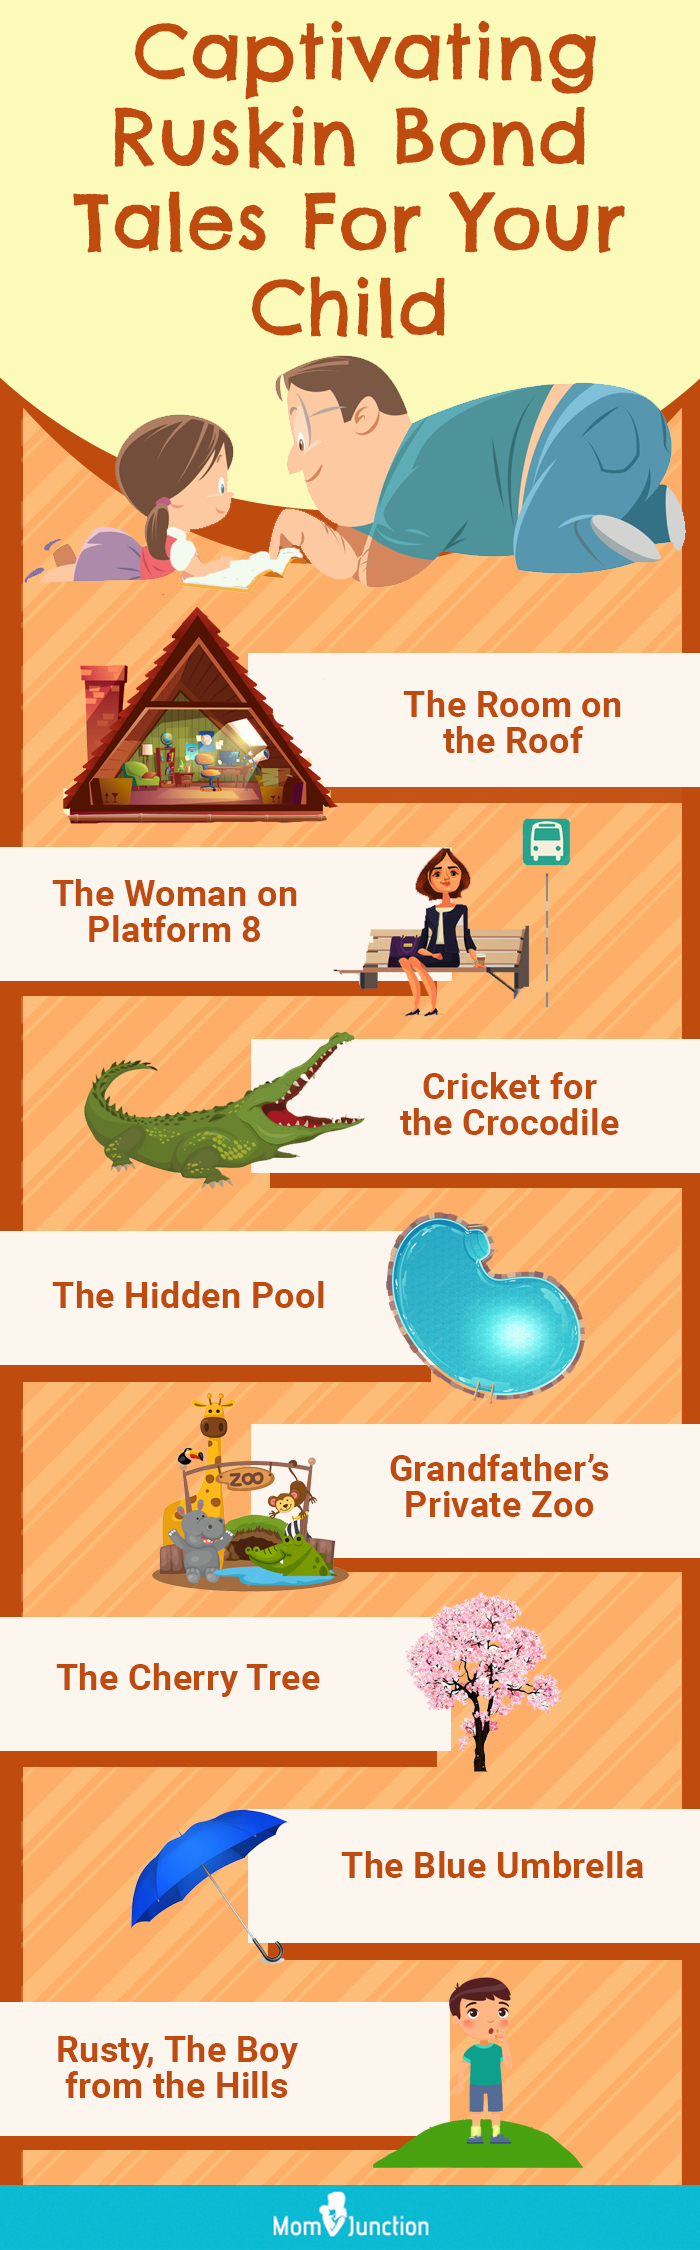 captivating ruskin bond tales for your child [infographic]